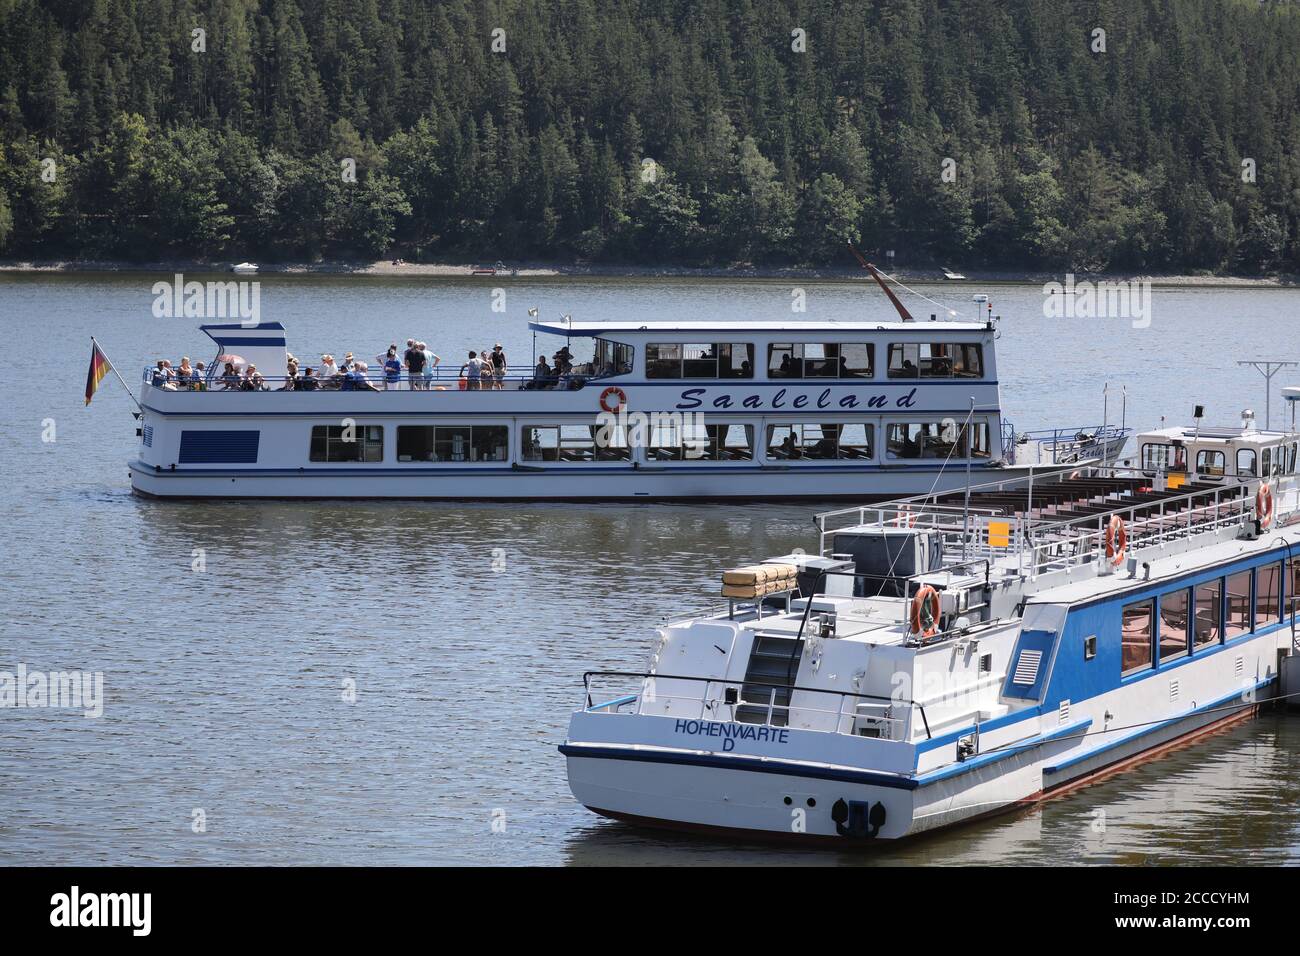 21 August 2020, Thuringia, Hohenwarte: Excursion boats sail on the water of the Hohenwarte reservoir. The Hohenwarte Reservoir is a reservoir that was created in the 1930s by damming the Saale River with a dam wall near the Thuringian village of Hohenwarte, which gave the reservoir its name. Photo: Bodo Schackow/dpa-Zentralbild/dpa Stock Photo